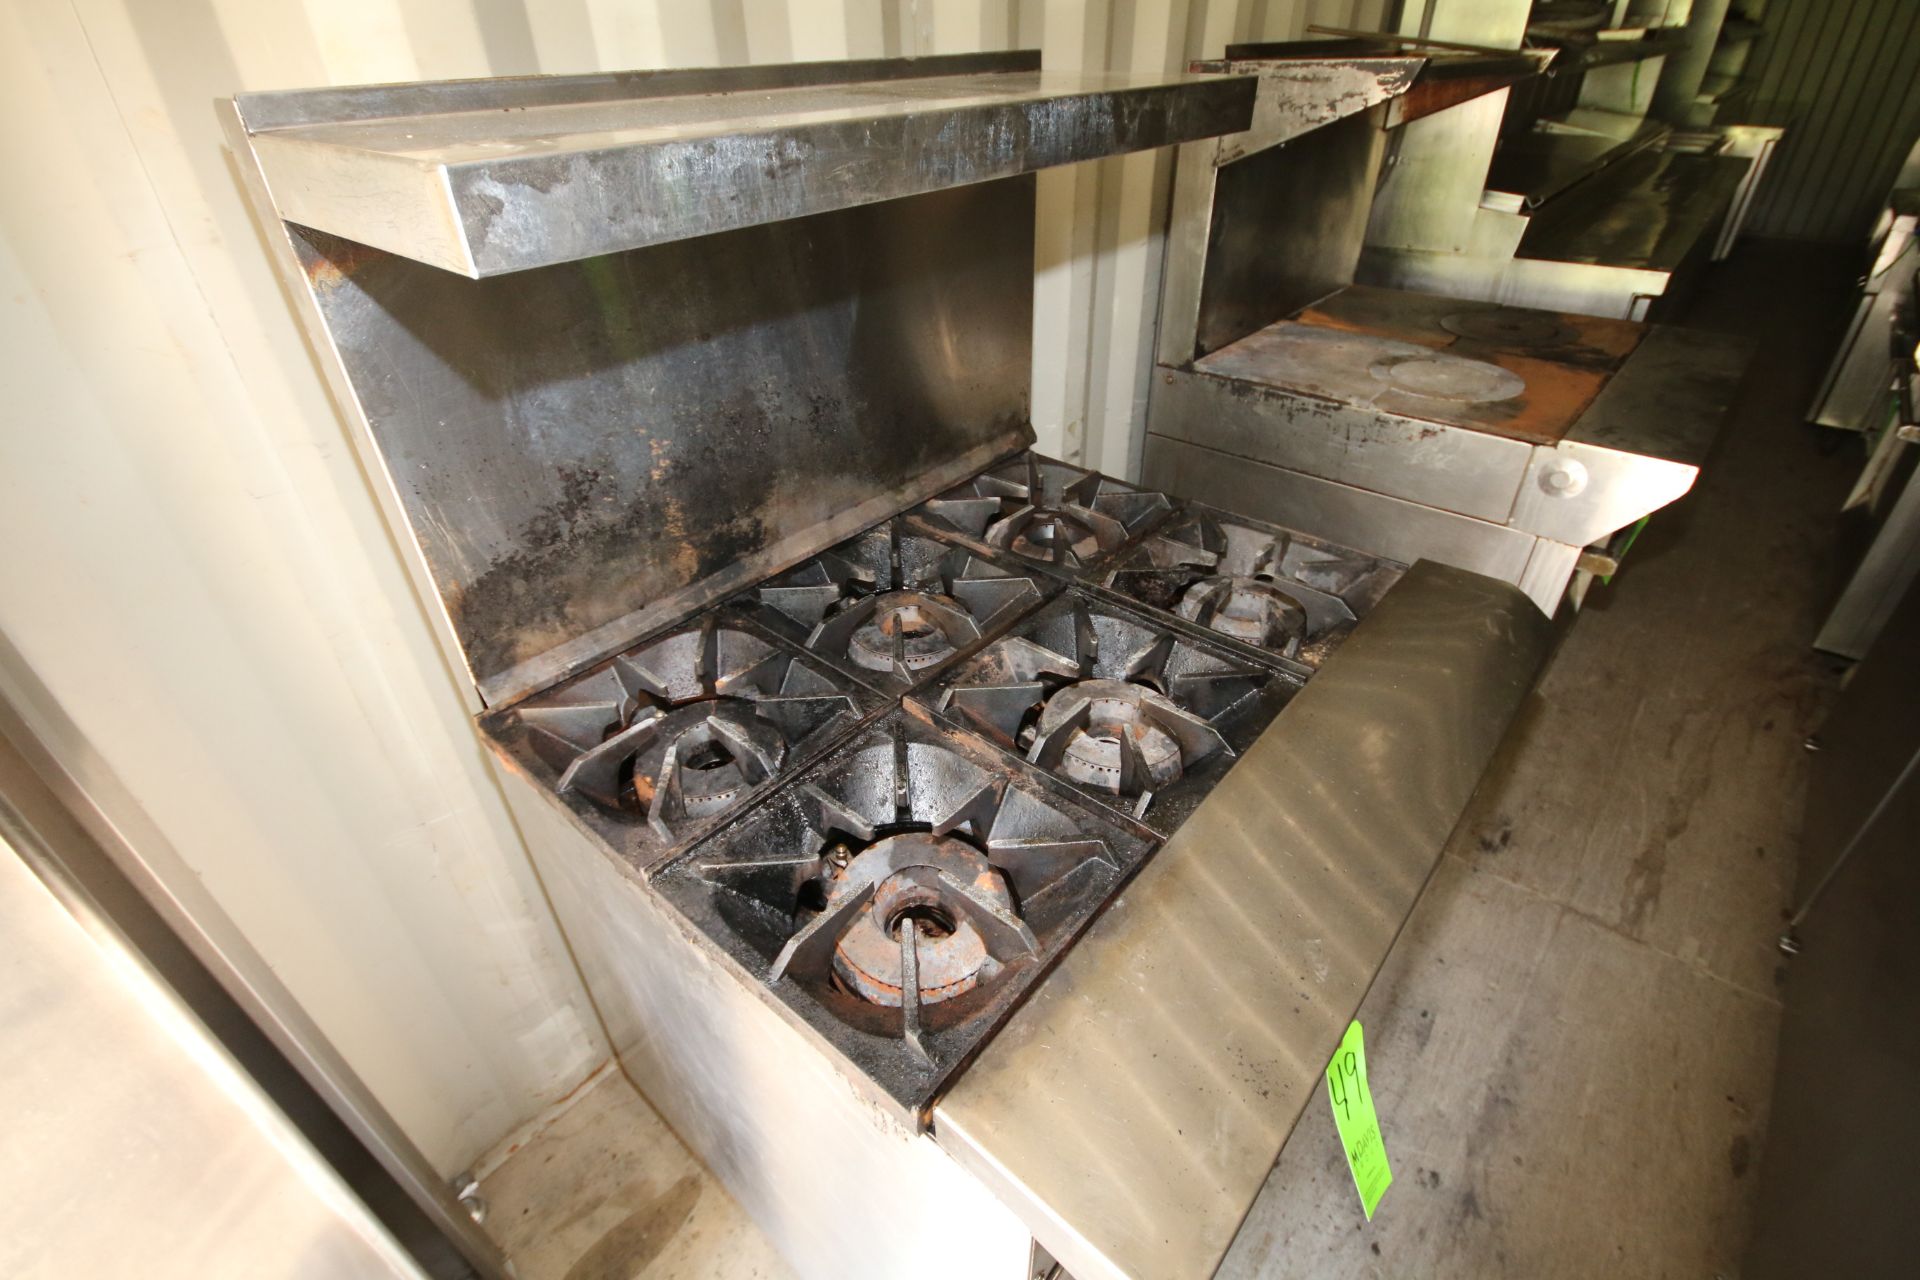 Bakers Pride 8-Burner Stove, with Bottom Oven and Racks, Natural Gas Operated - Image 3 of 4